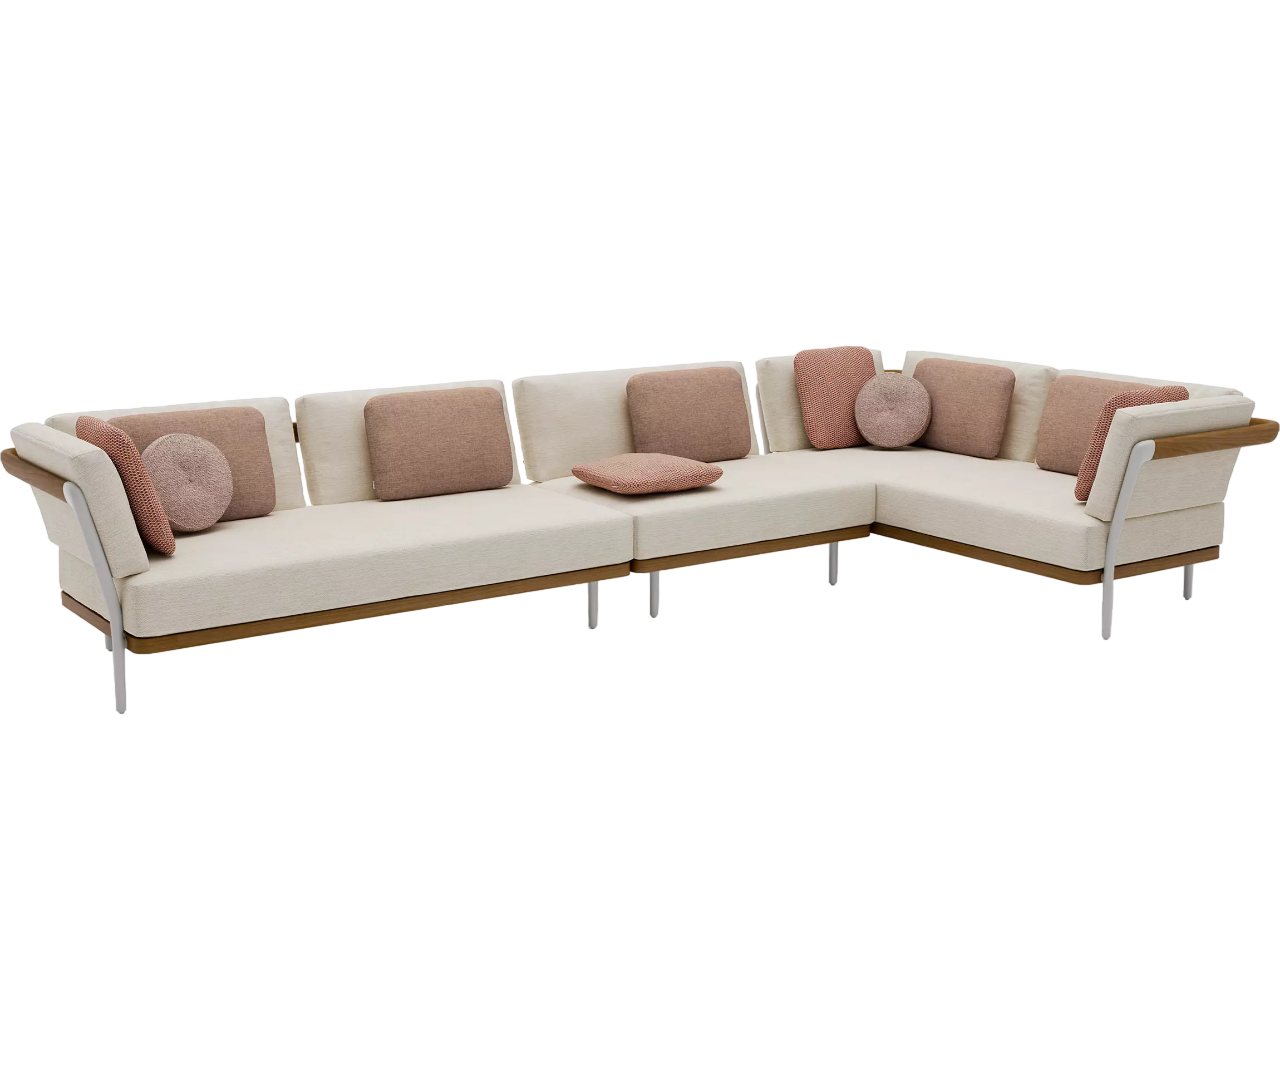 Flows Sectional Concept 7 | Manutti